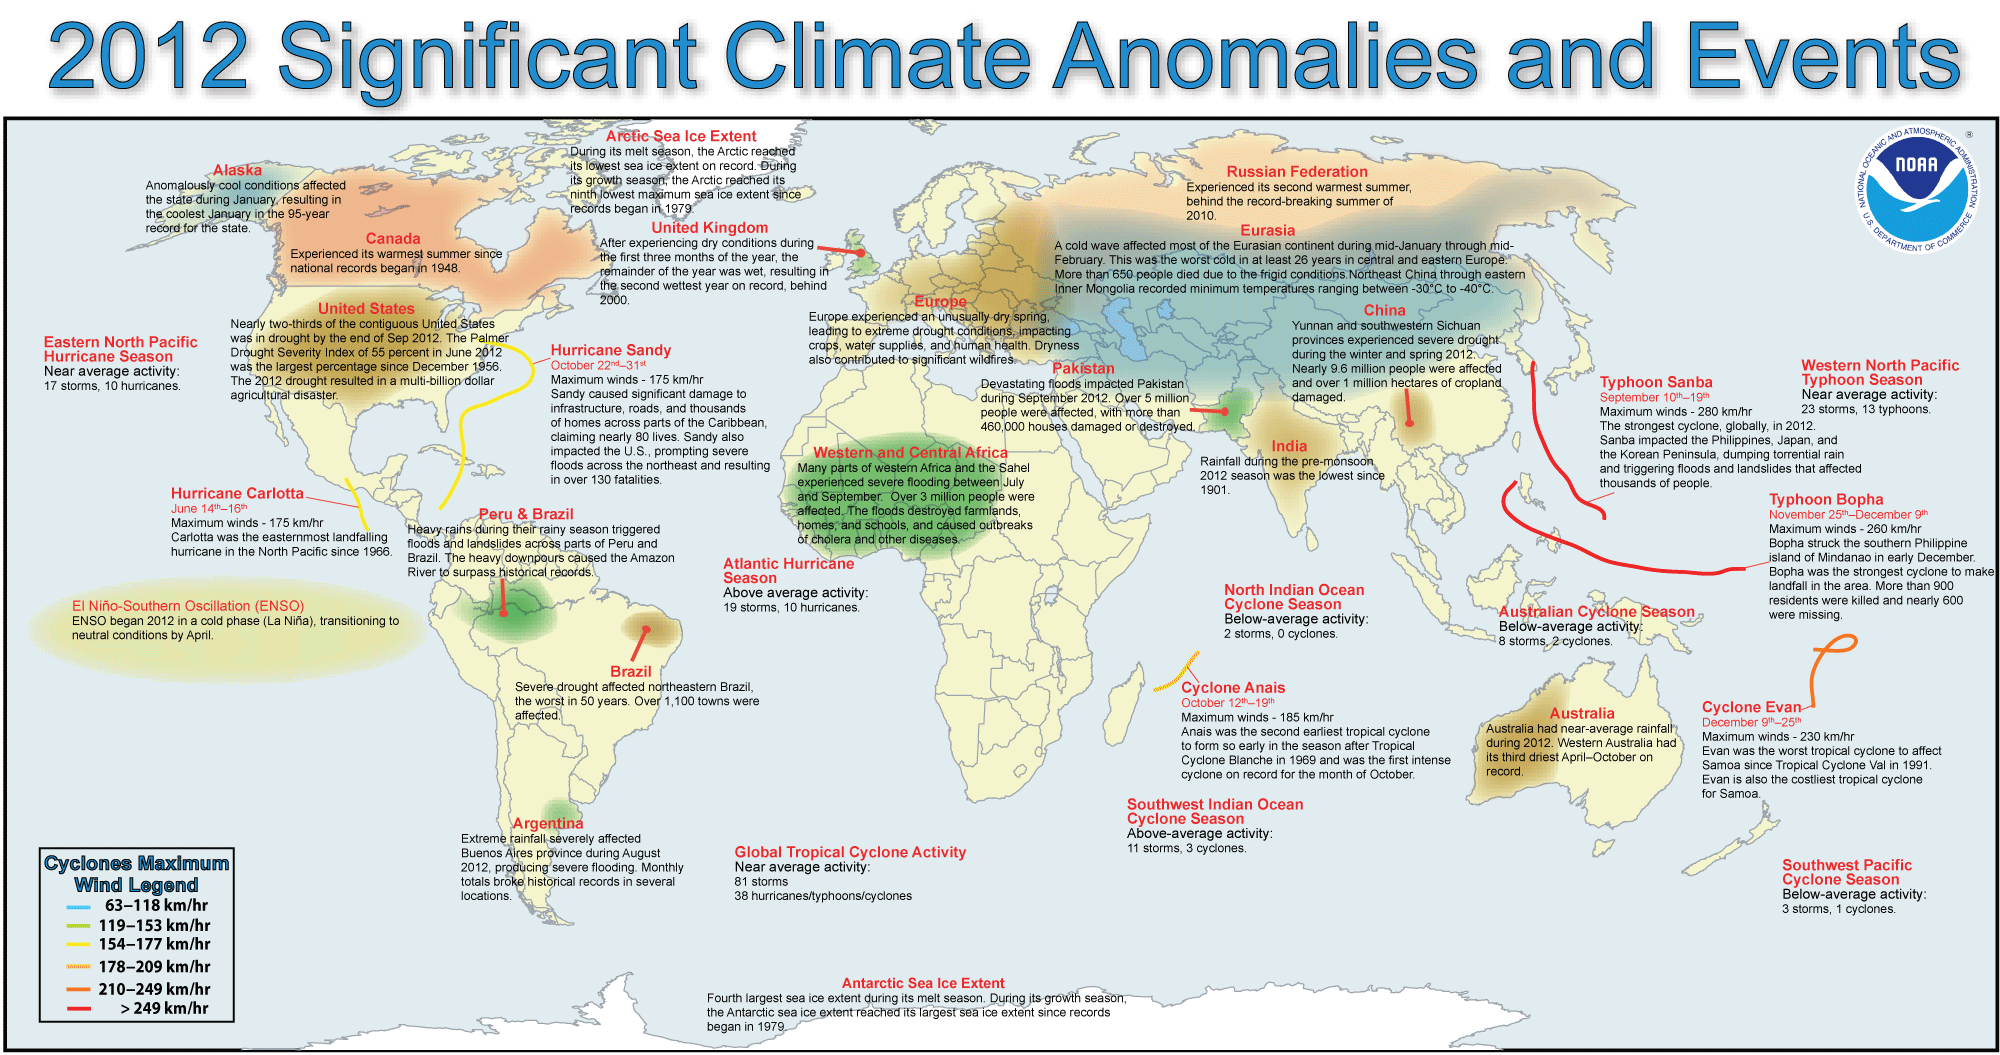 Significant Climate Anomalies and Events in 2012